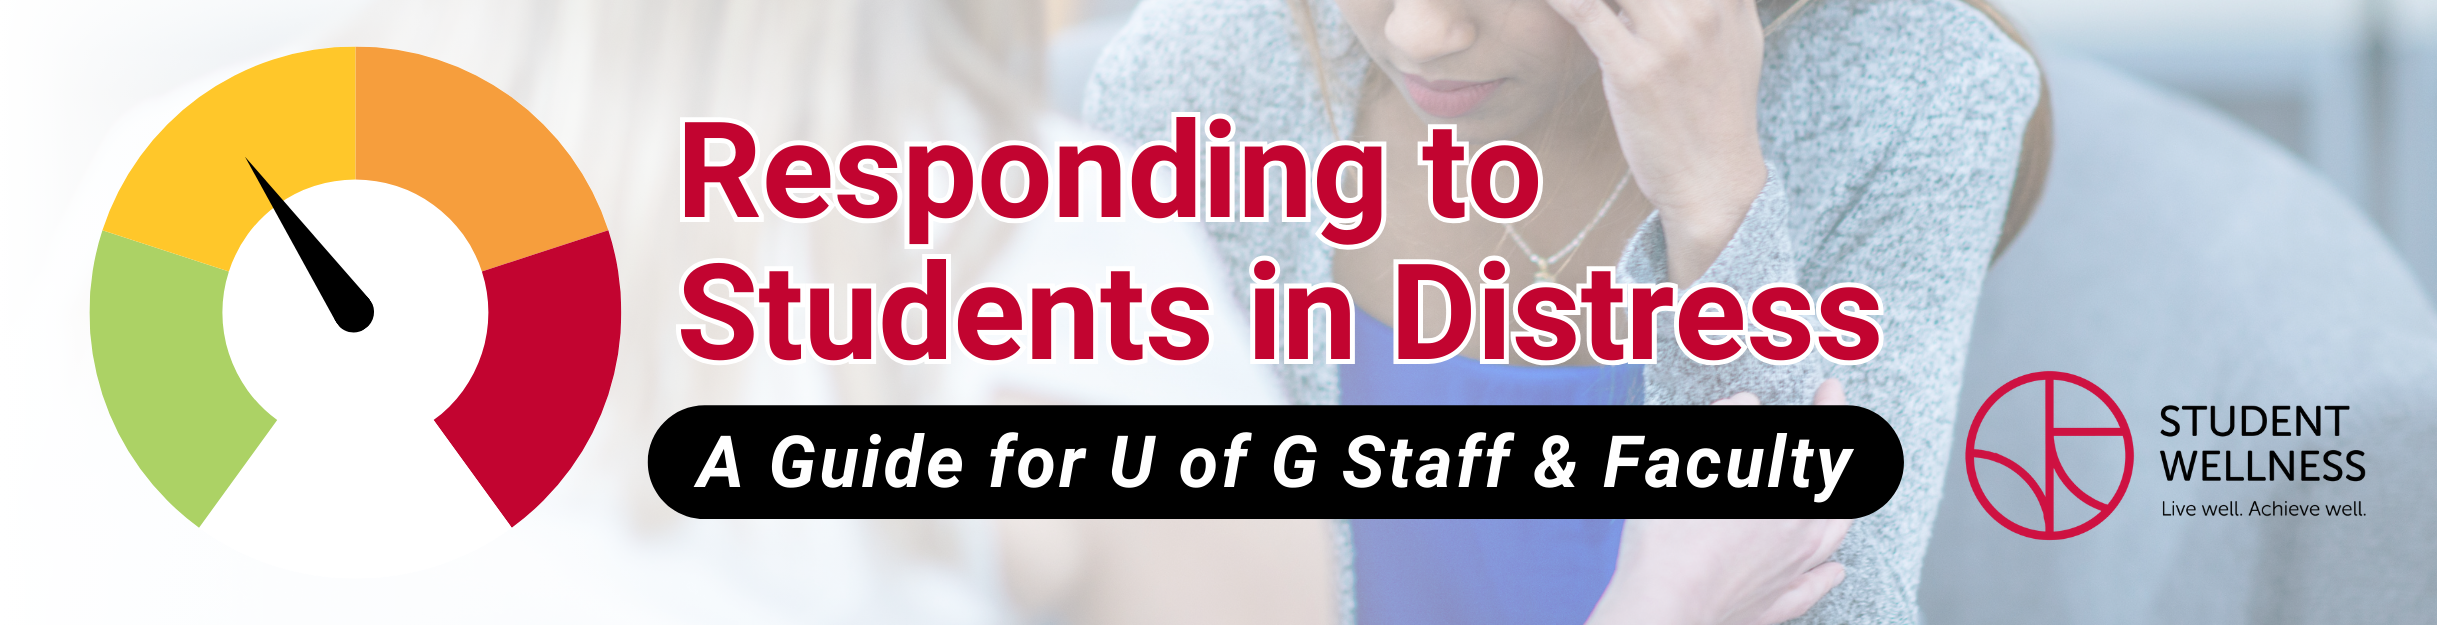 Responding to Students in Distress. A guide for U of G staff and faculty. Student wellness logo.